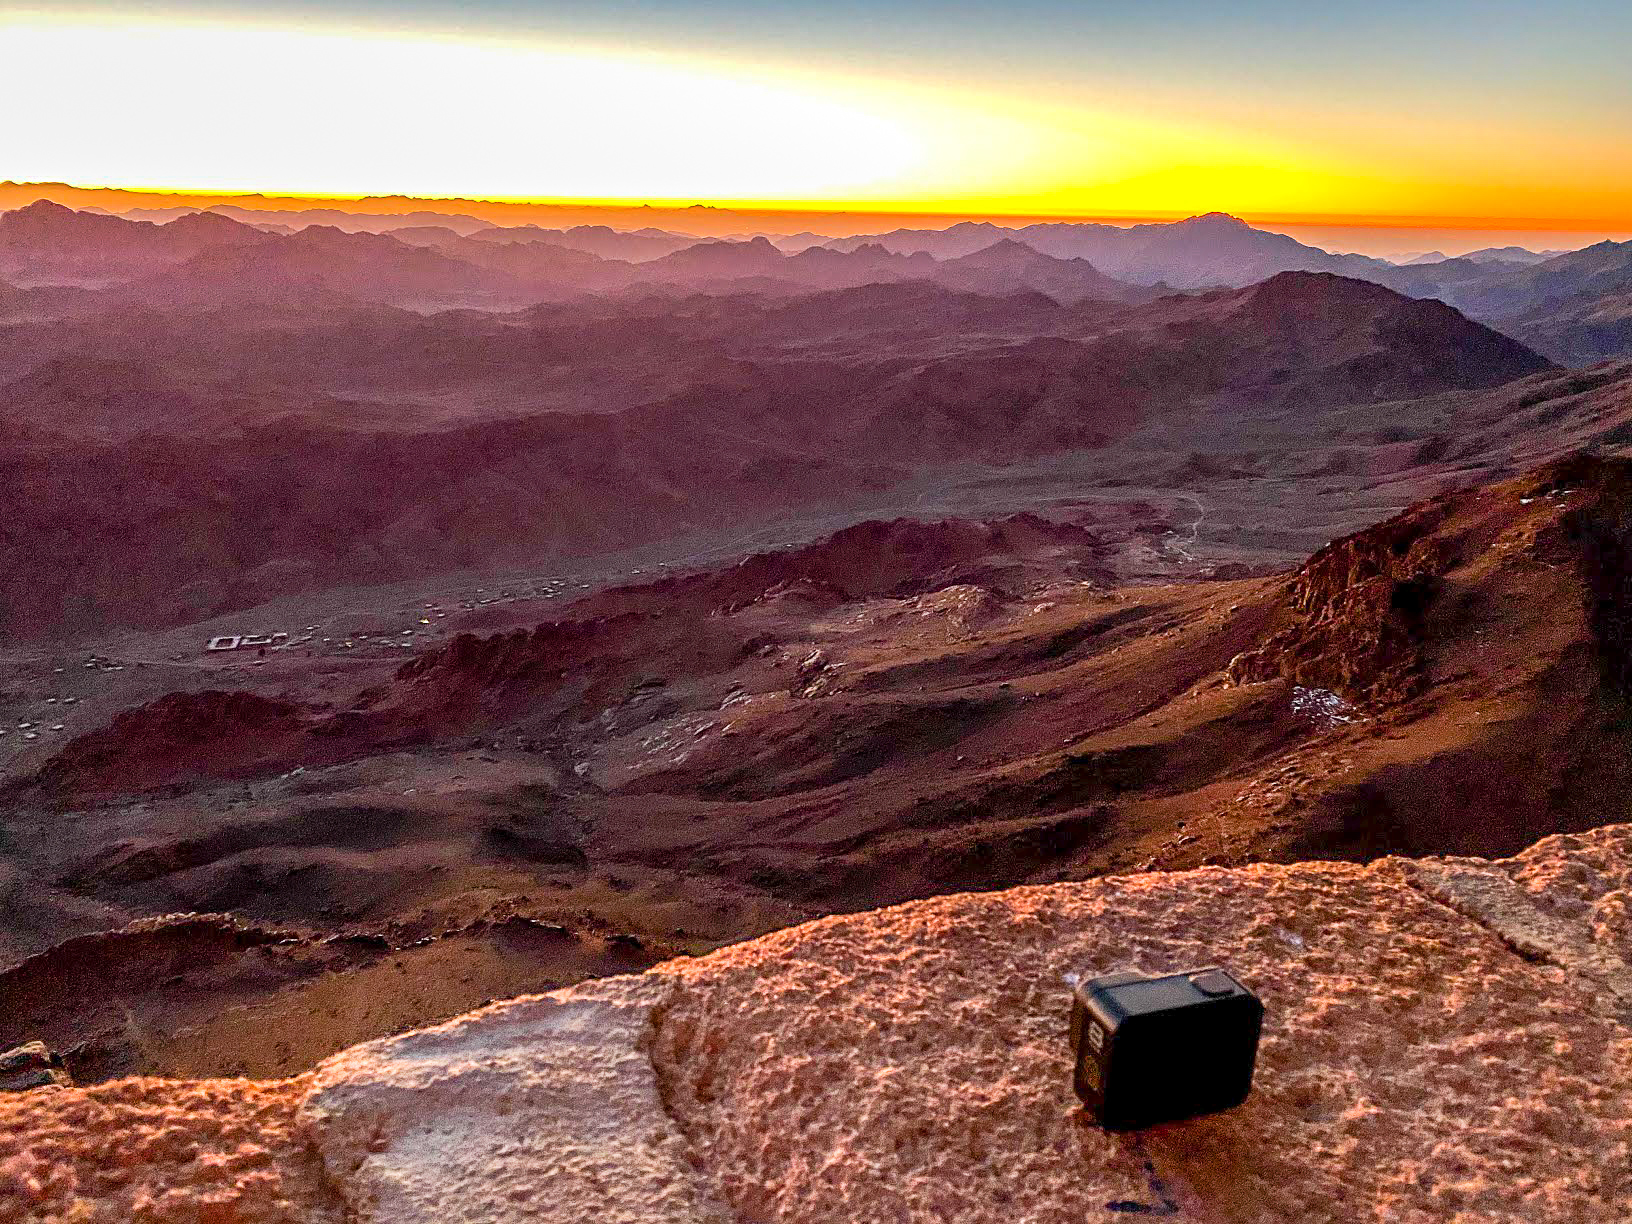 The sunrise over the mountains from the top of Mount Sinai, Egypt